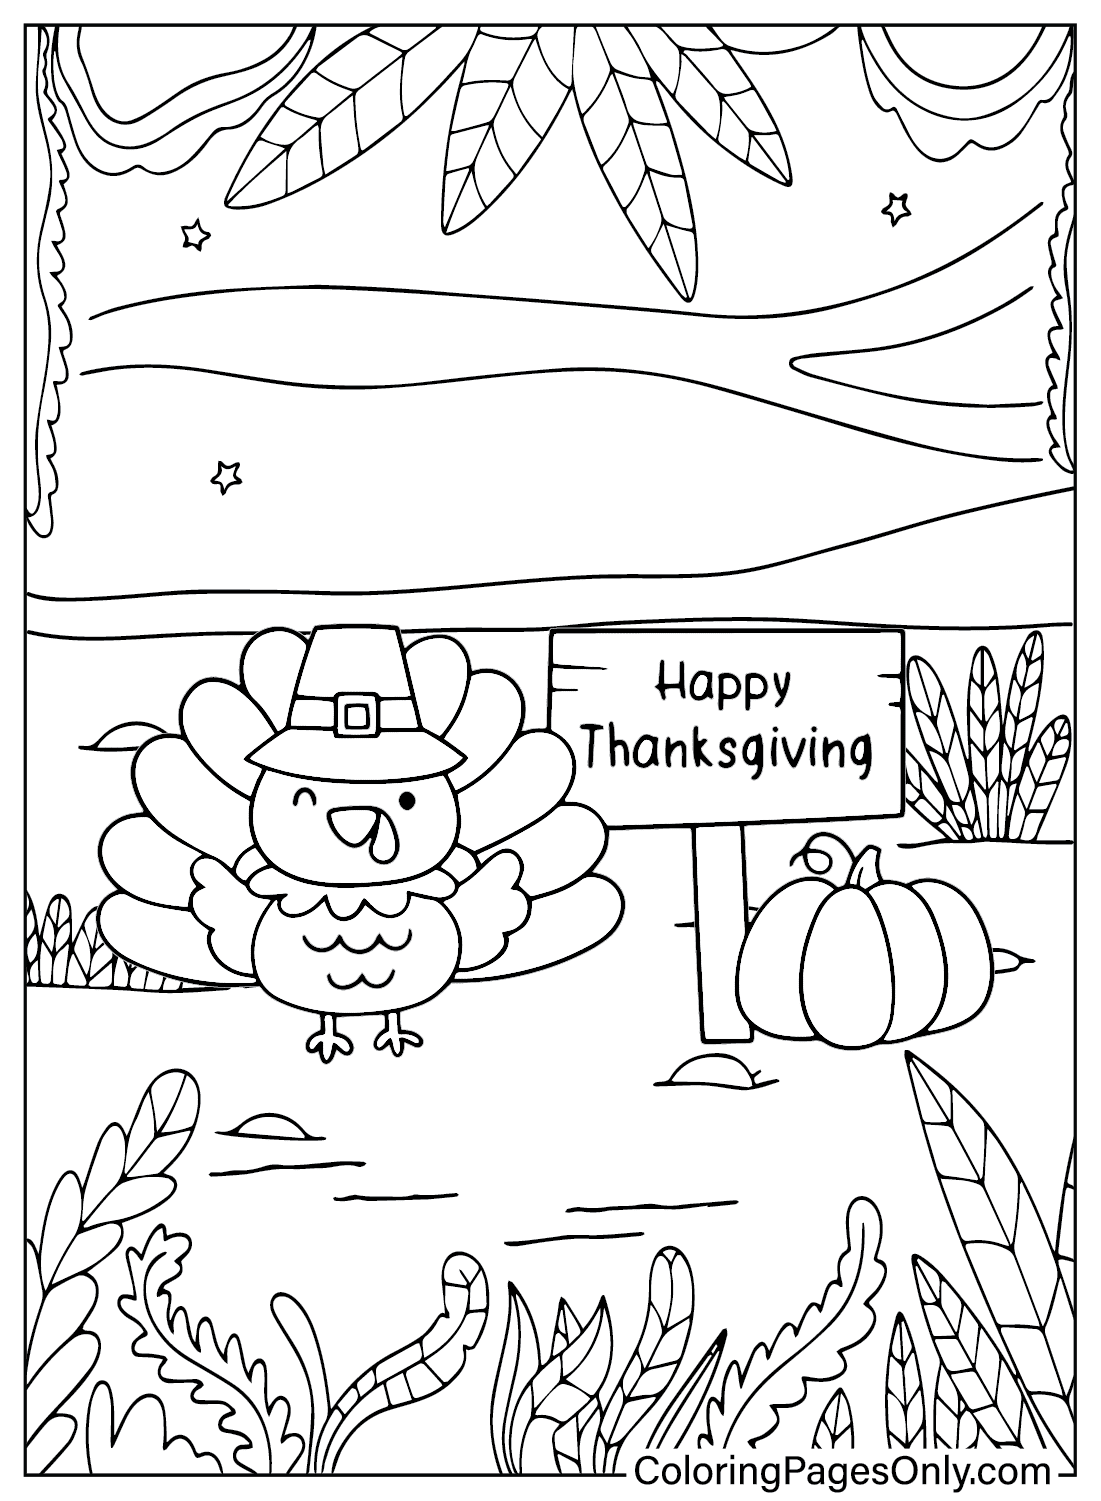 thanksgiving-coloring-page-free-printable-coloring-pages